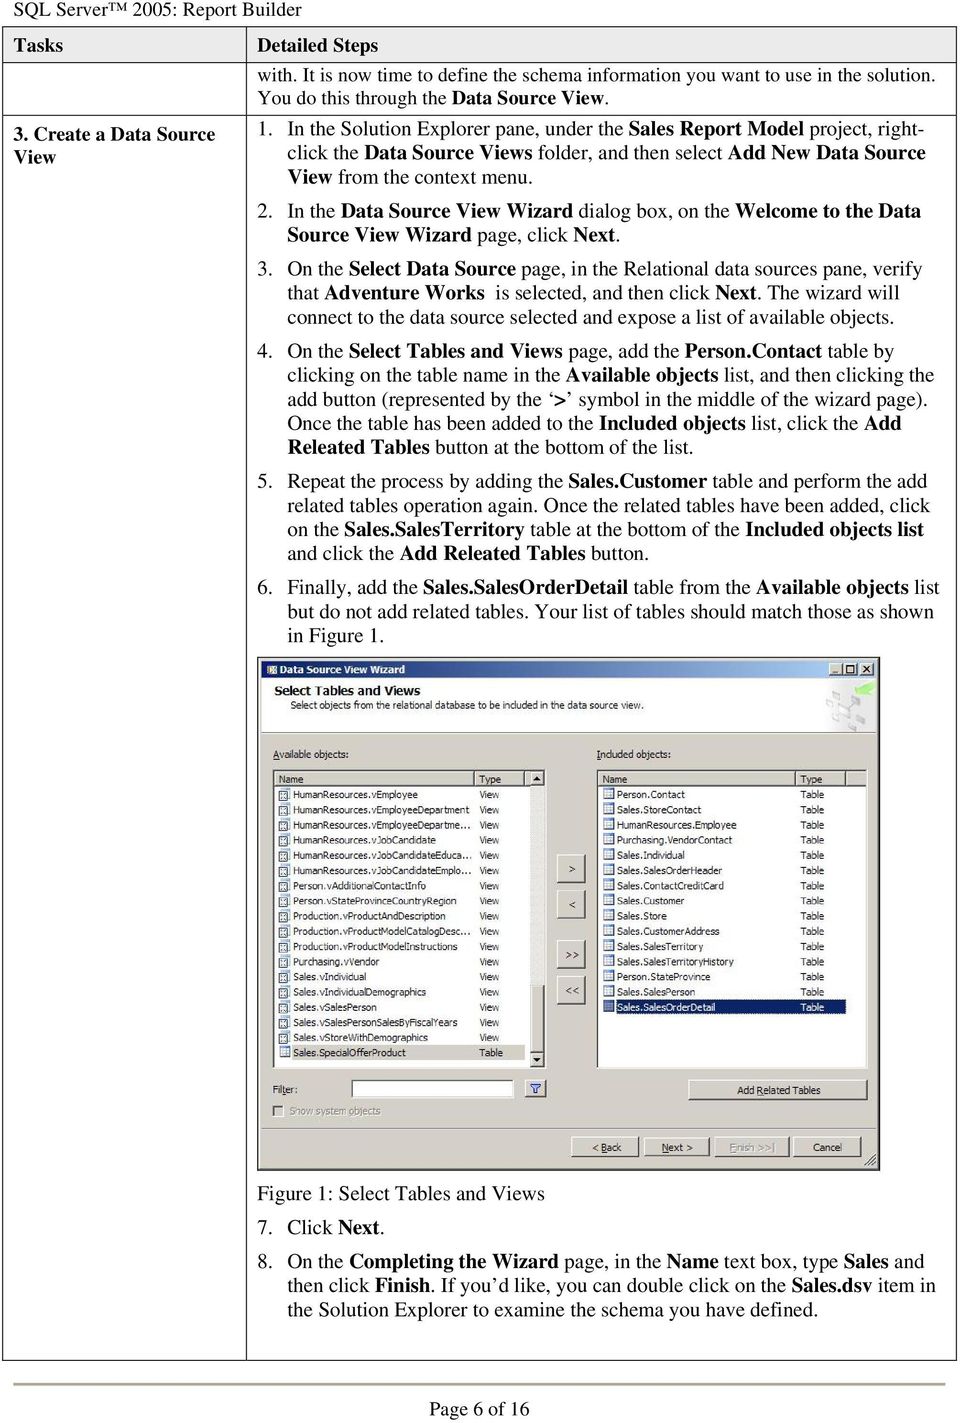 In the Data Source View Wizard dialog box, on the Welcome to the Data Source View Wizard page, click Next. 3.